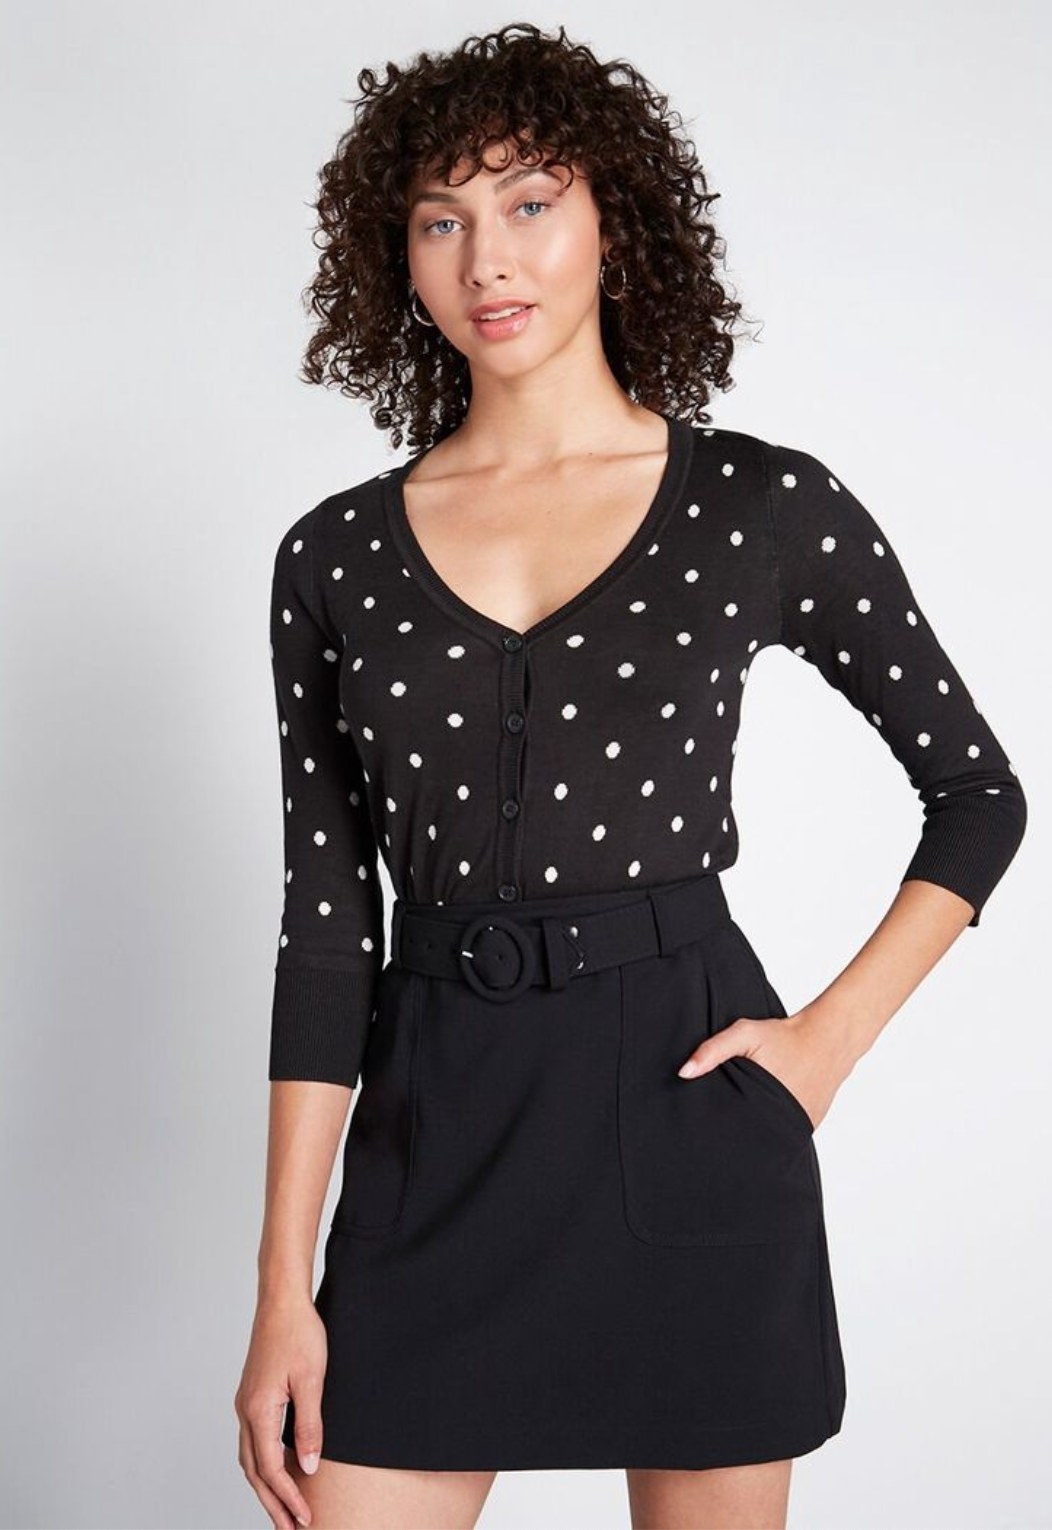 Model wearing the cardigan in black with white polka-dots